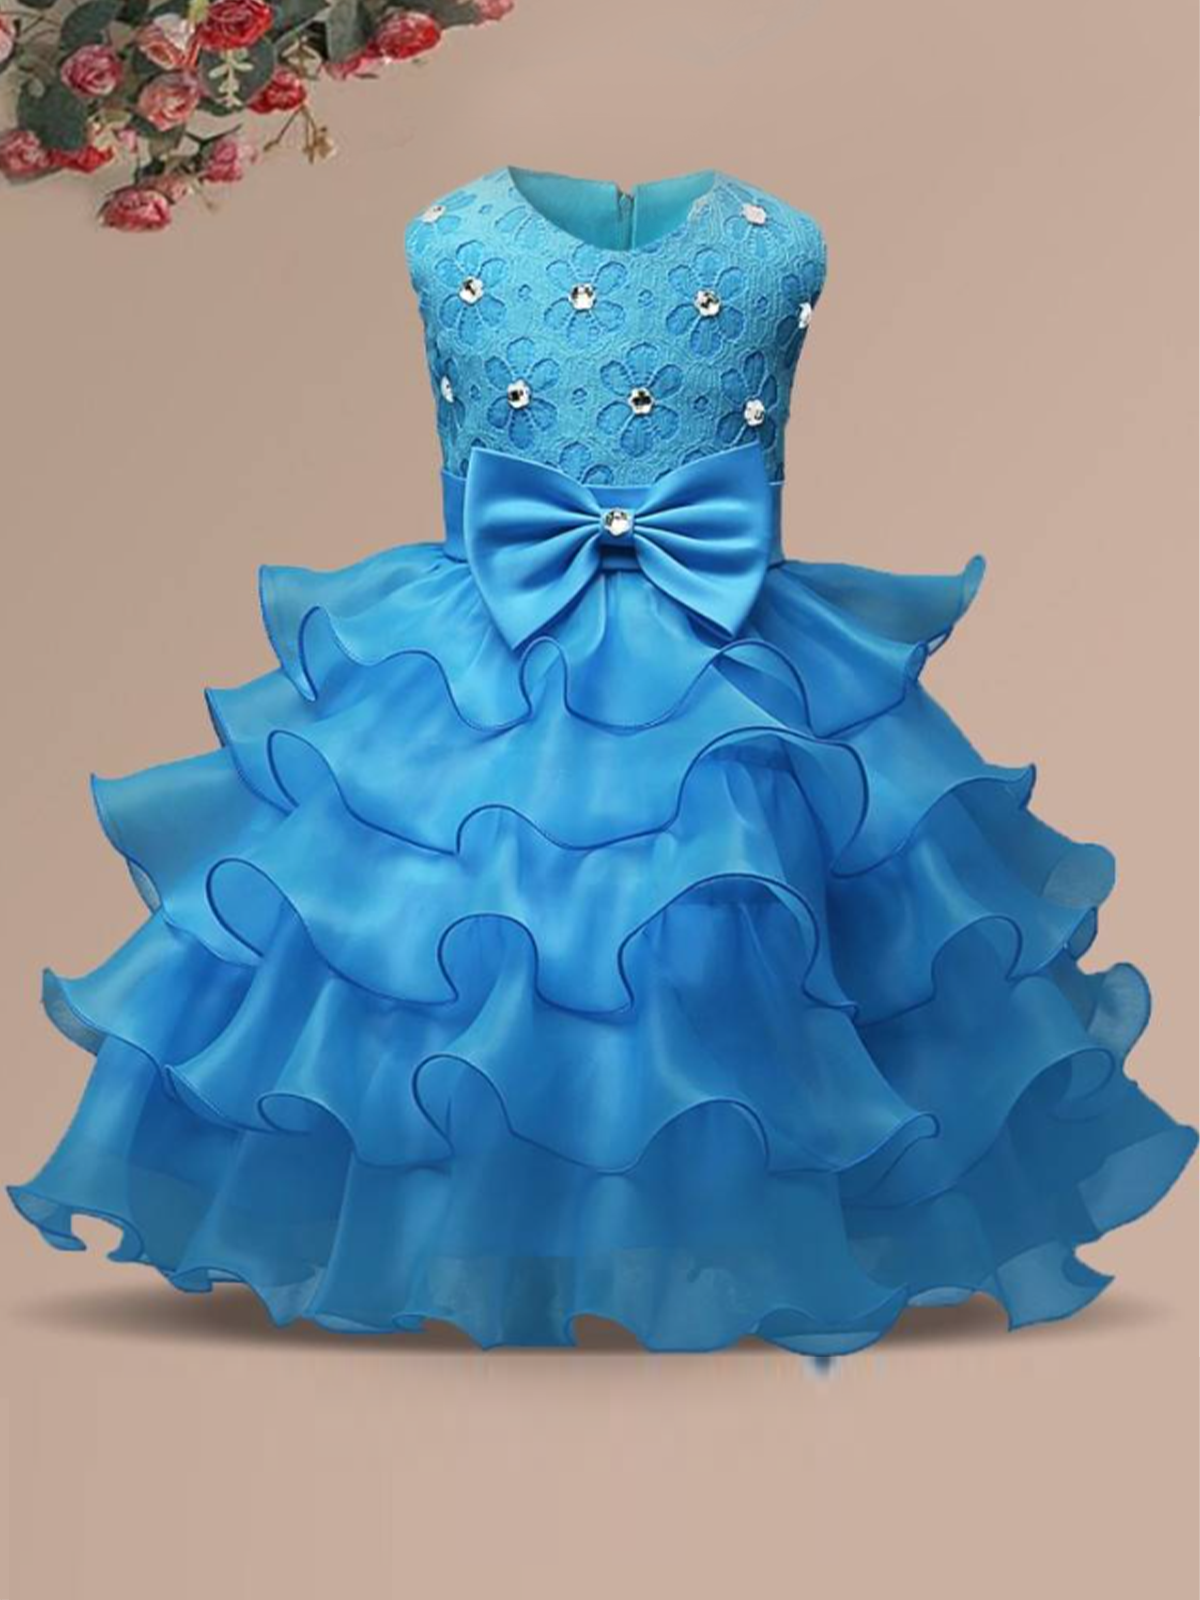 Baby princess dress has a floral lace bodice with rhinestone details, a bow belt at the waist, and a multi-layered tulle skirt-light blue